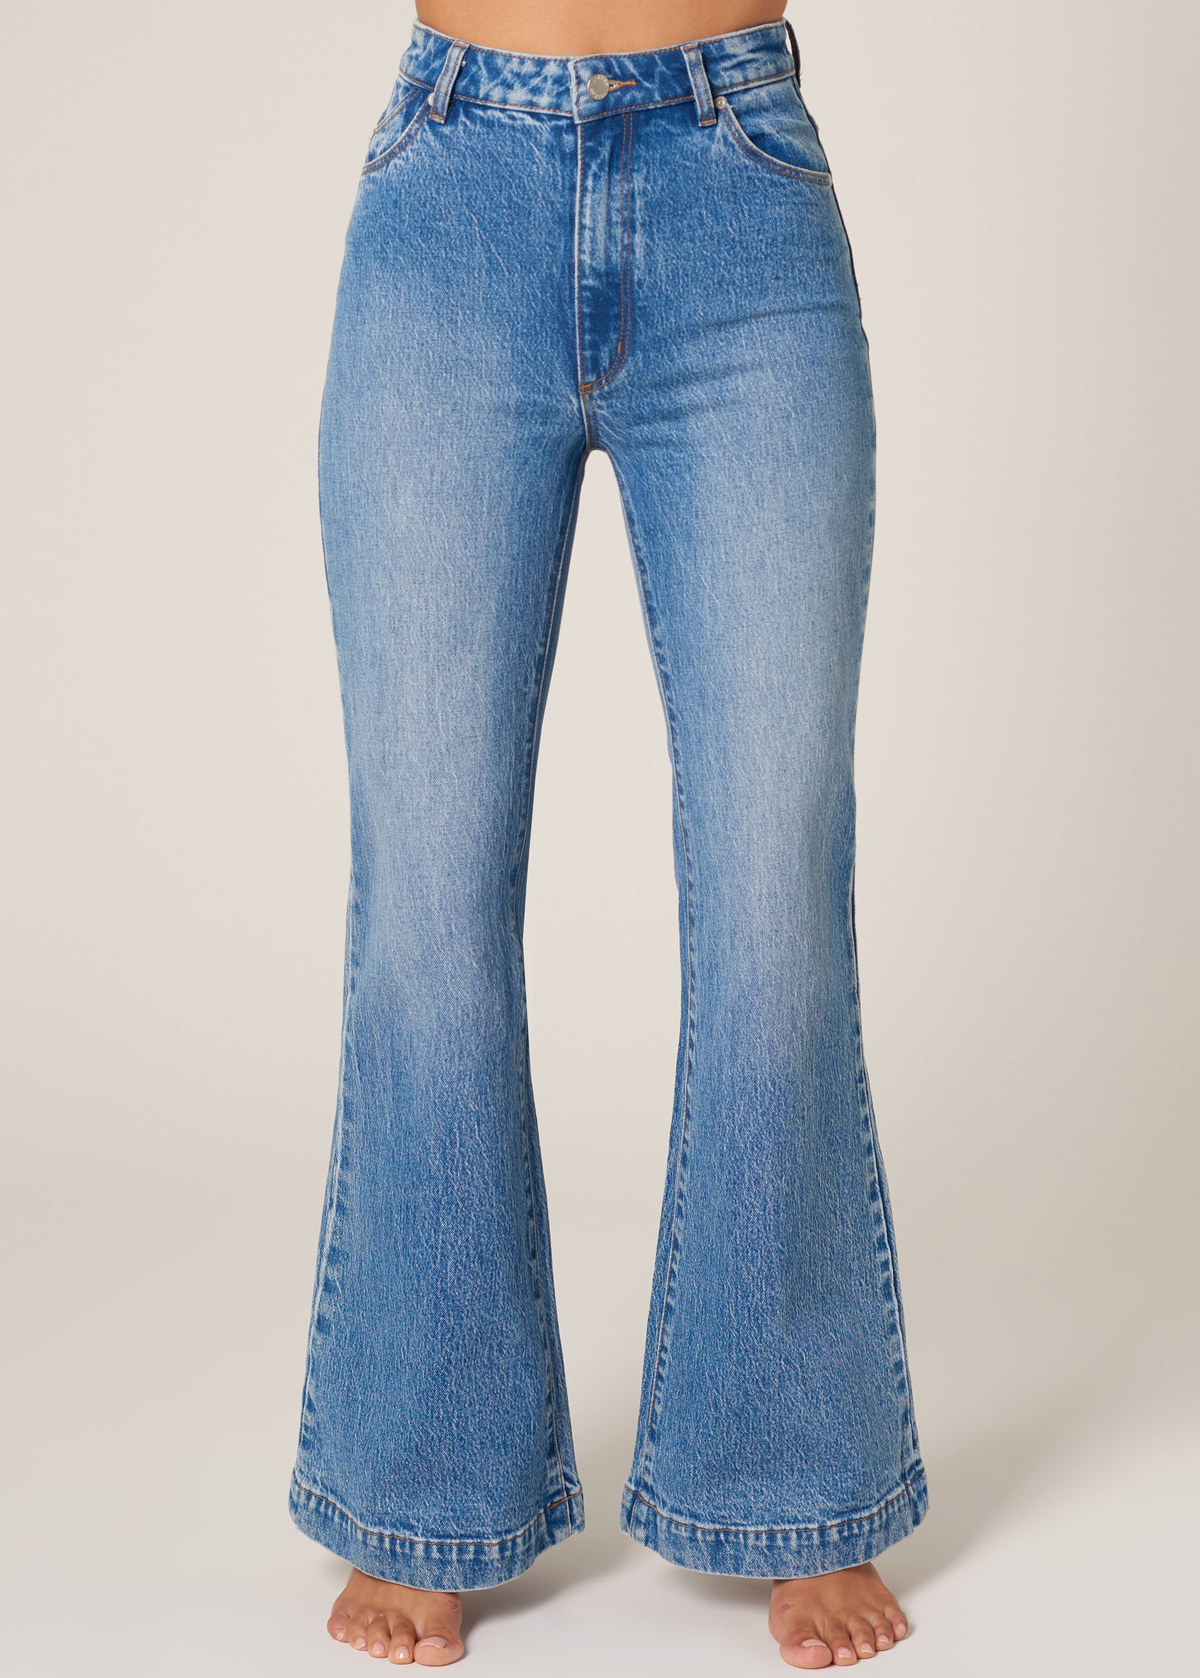 The Rolla's Jeans Salty Blue Denim Eastcoast Flares. 70s inspired bell bottom jeans with a high rise waist and faded blue denim wash.